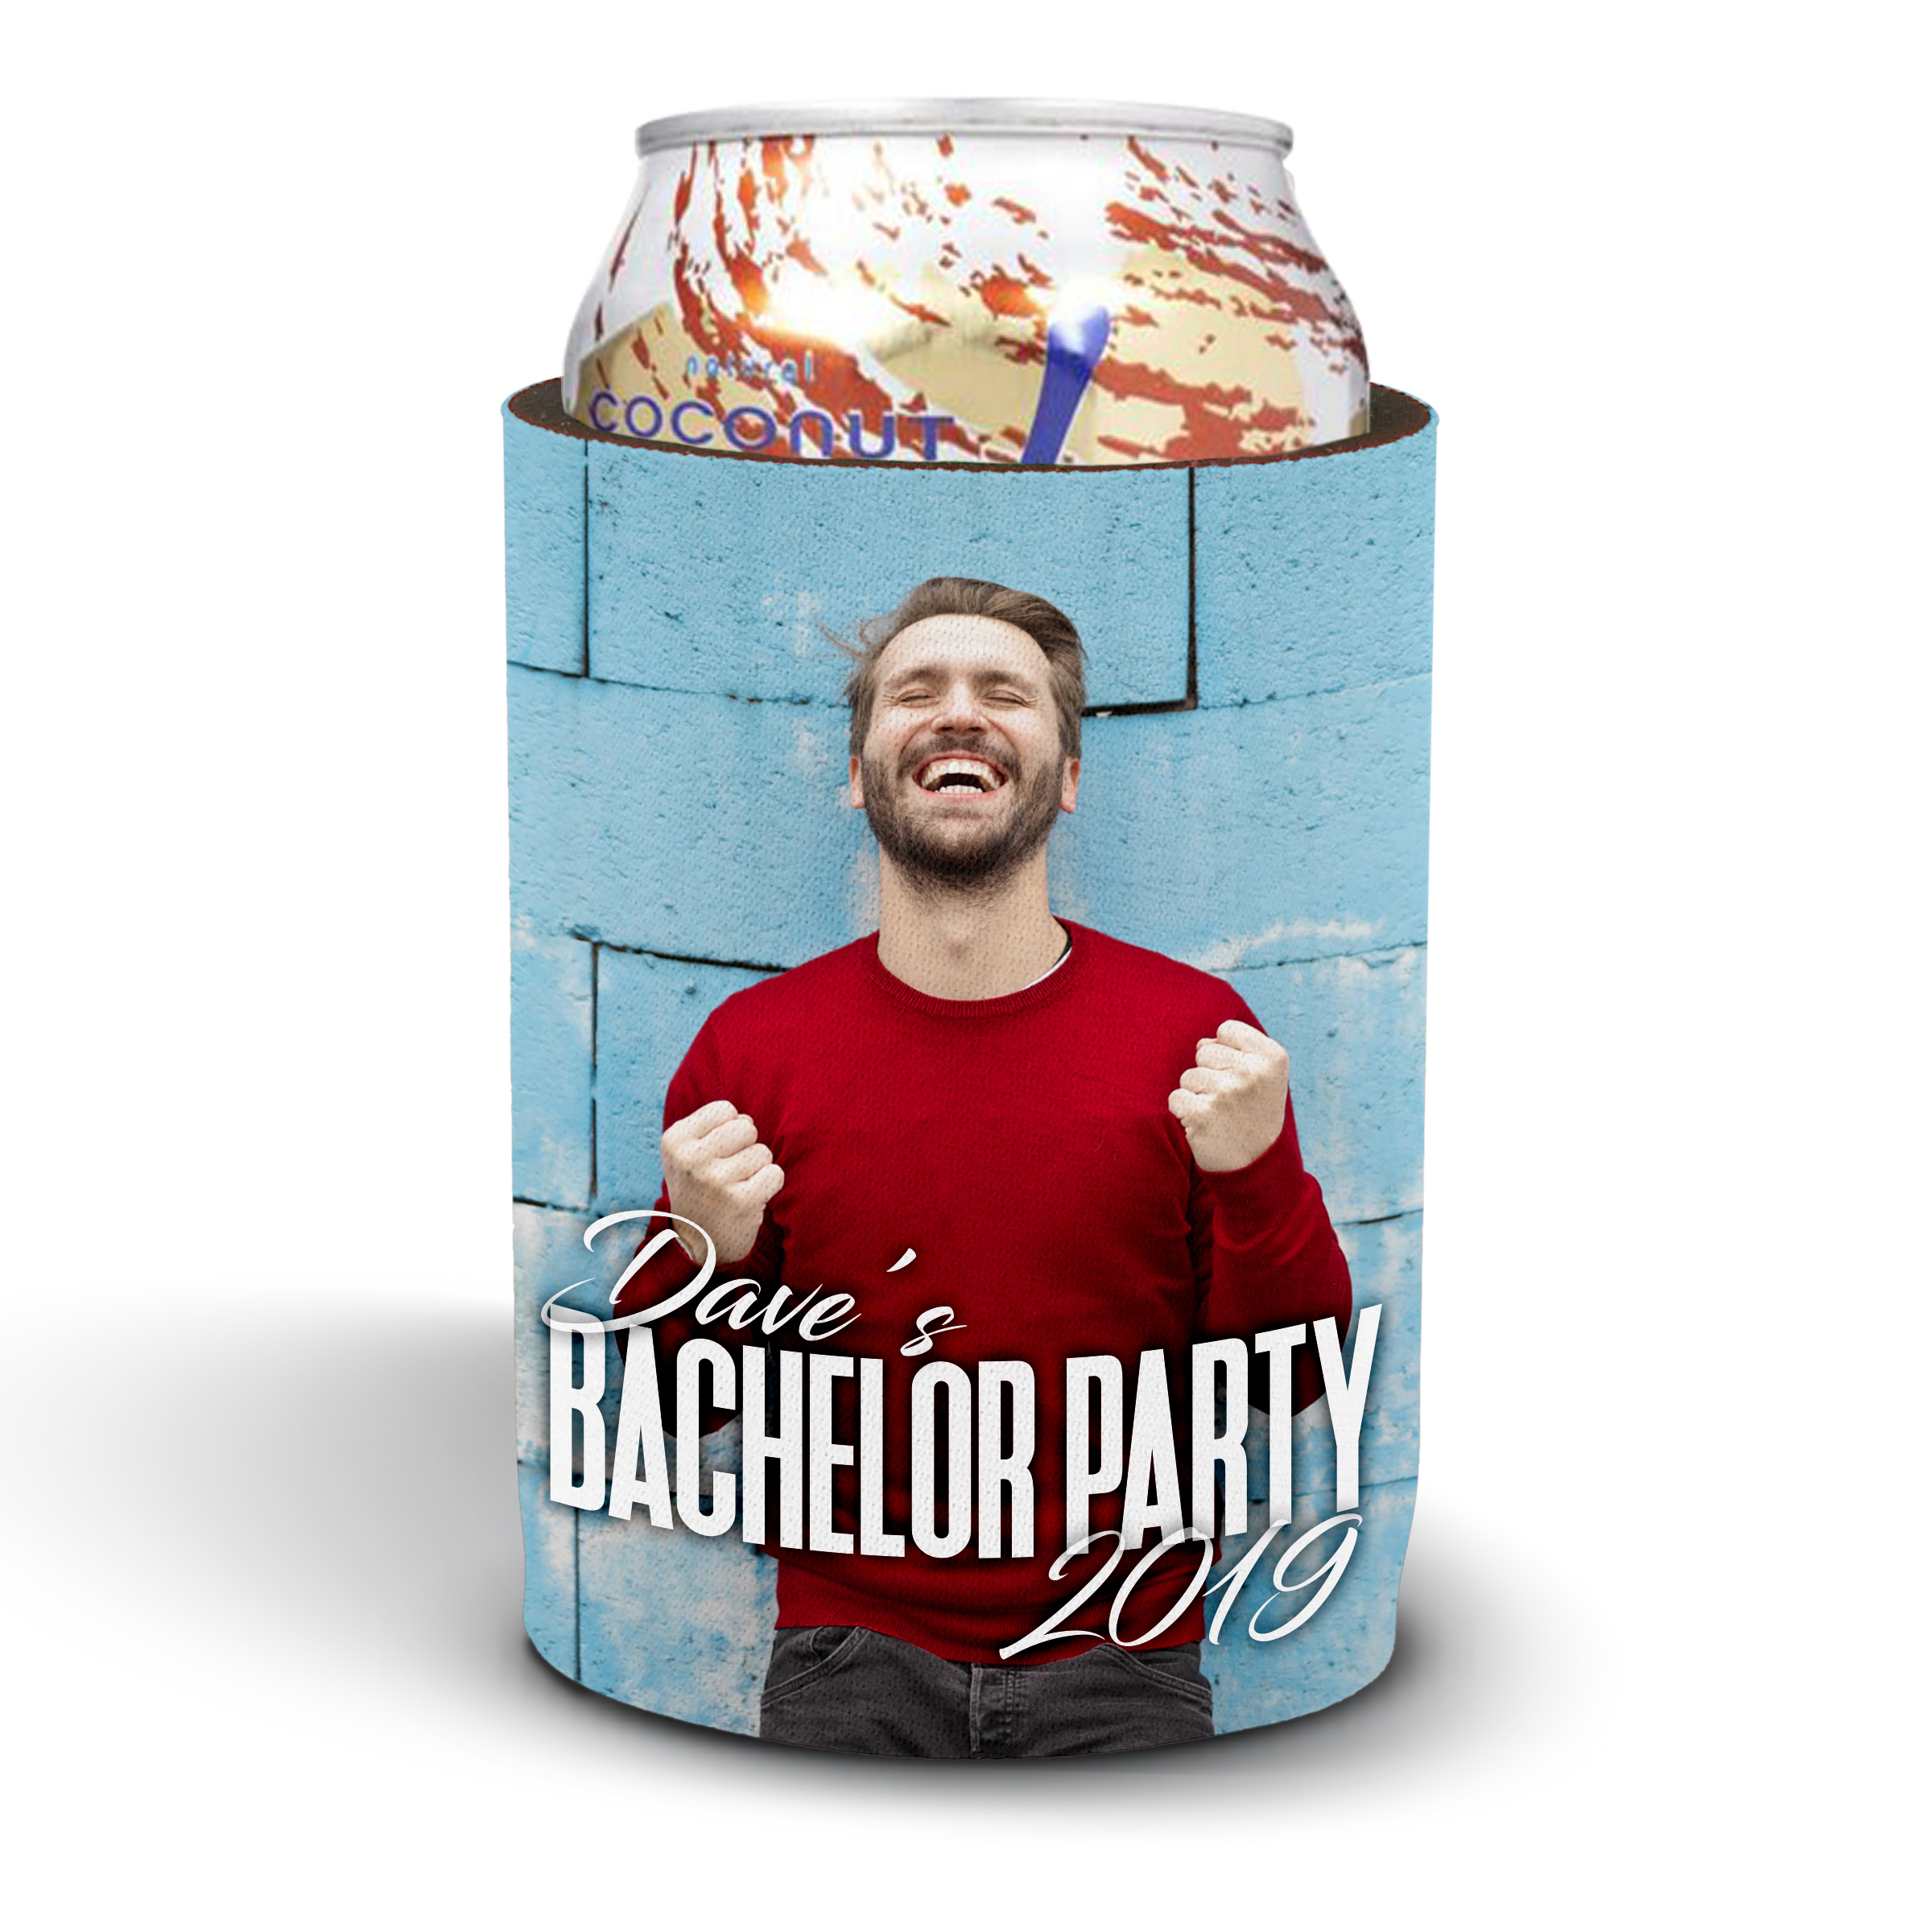 Bachelor party koozie party favor